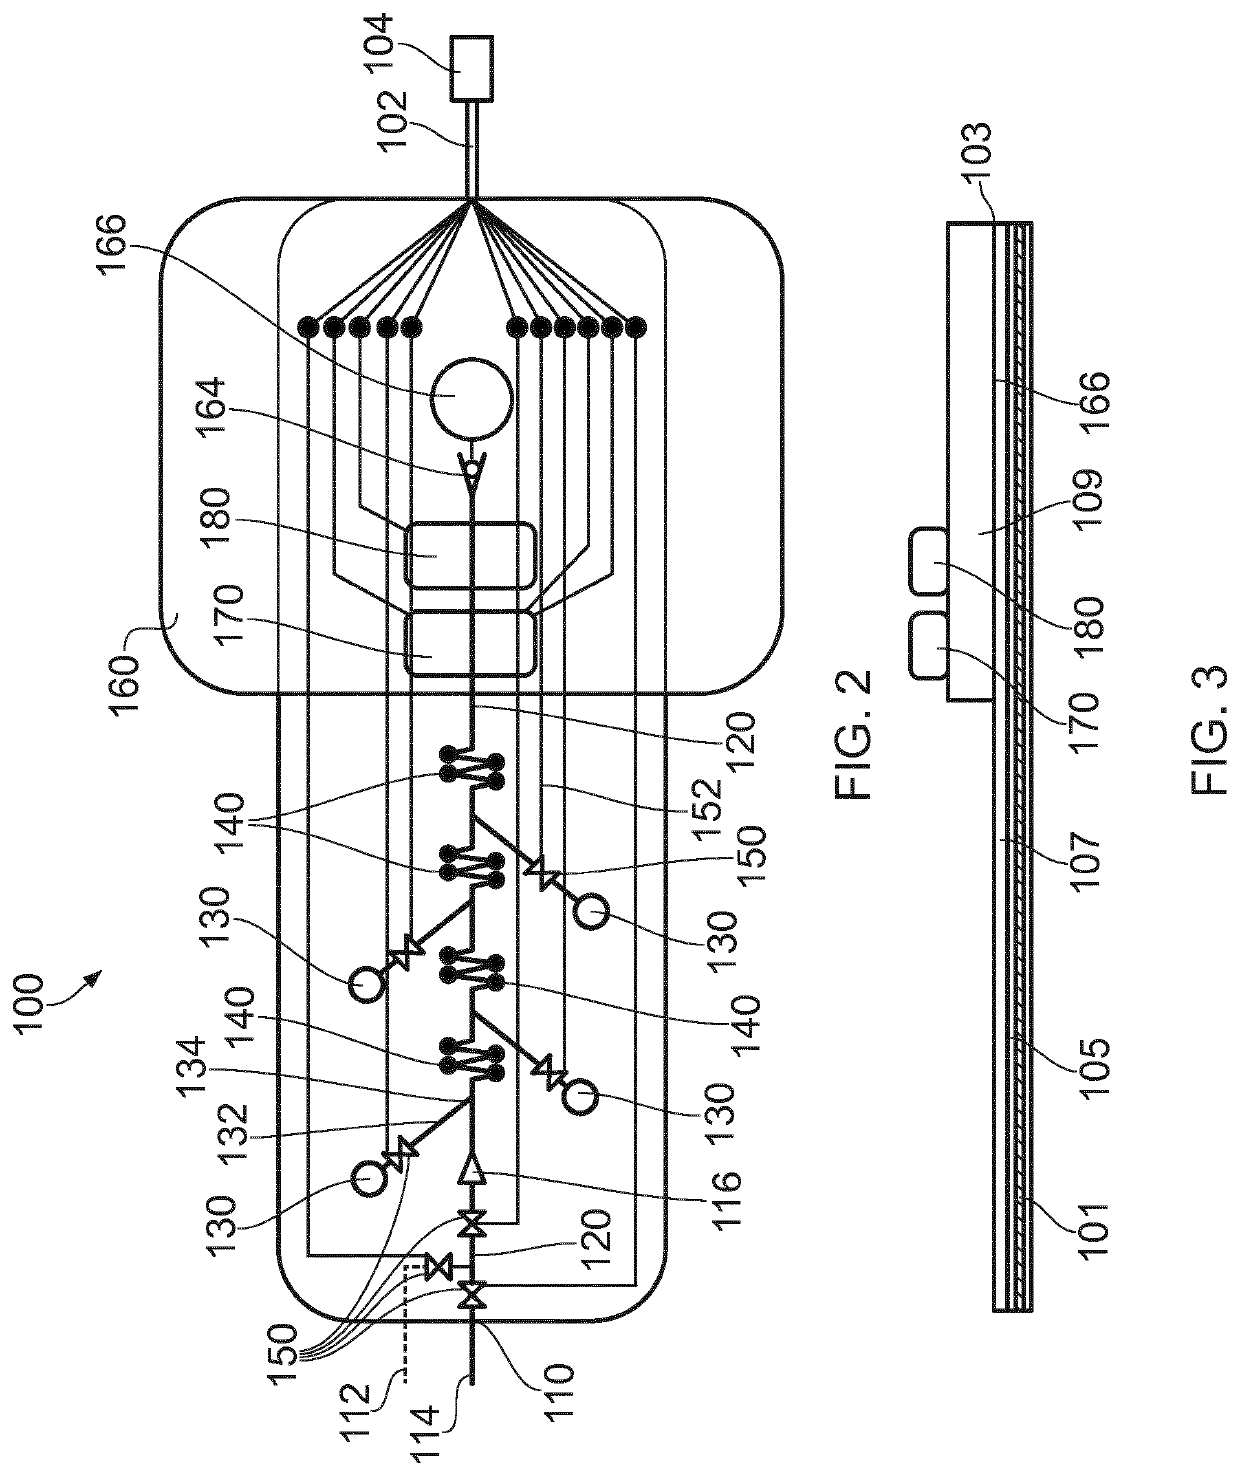 Microfluidic device for cell culture monitoring